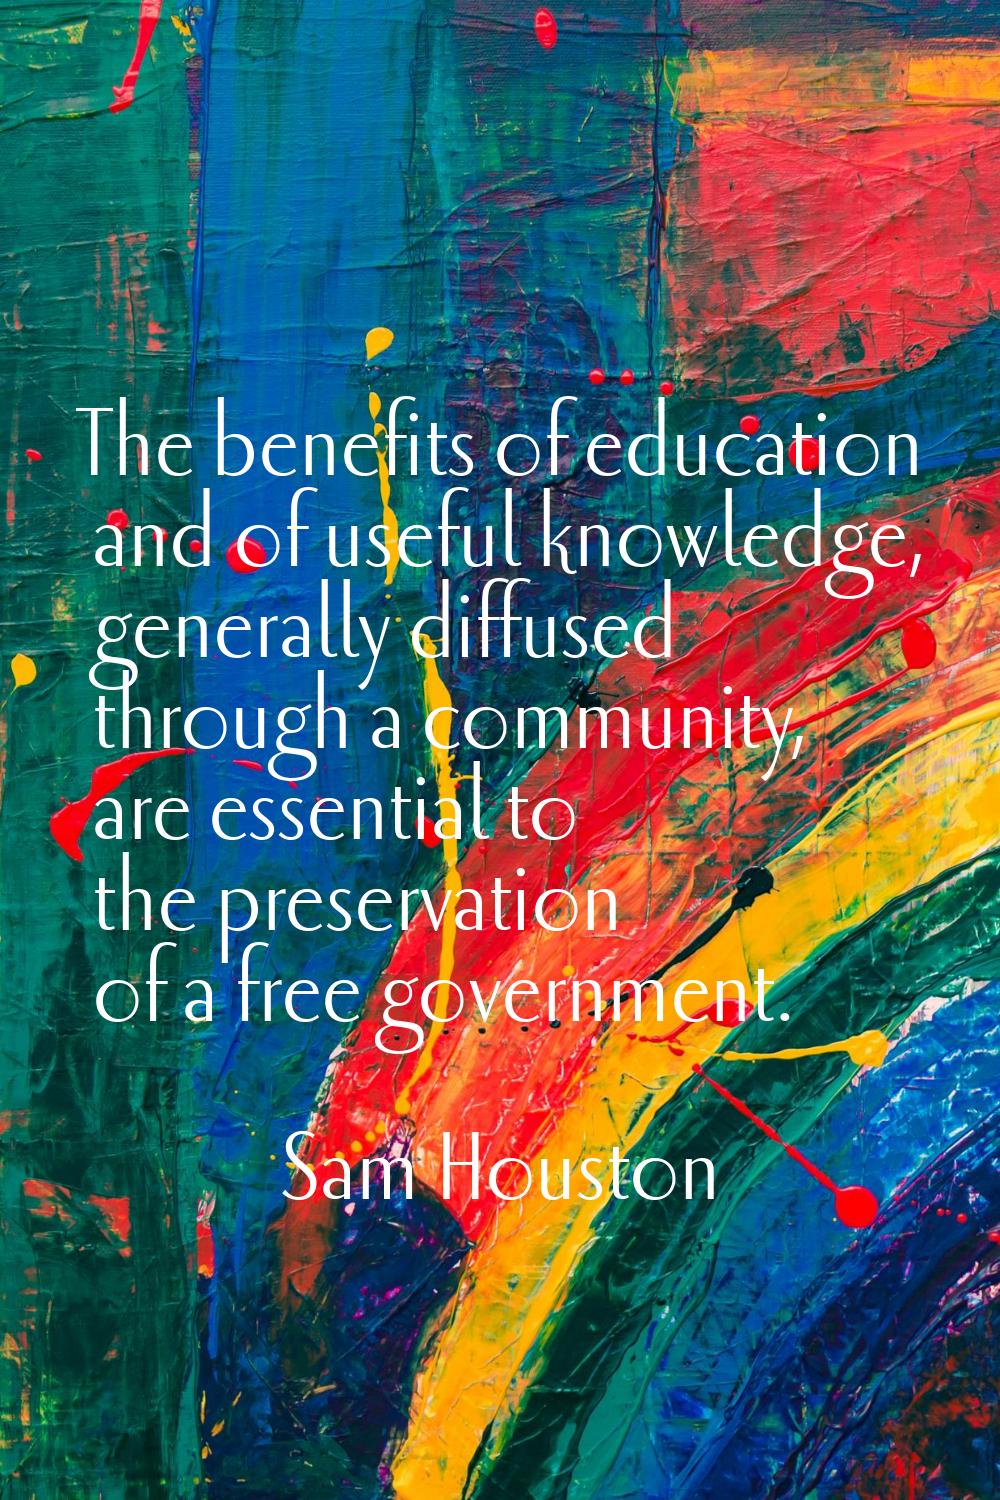 The benefits of education and of useful knowledge, generally diffused through a community, are esse